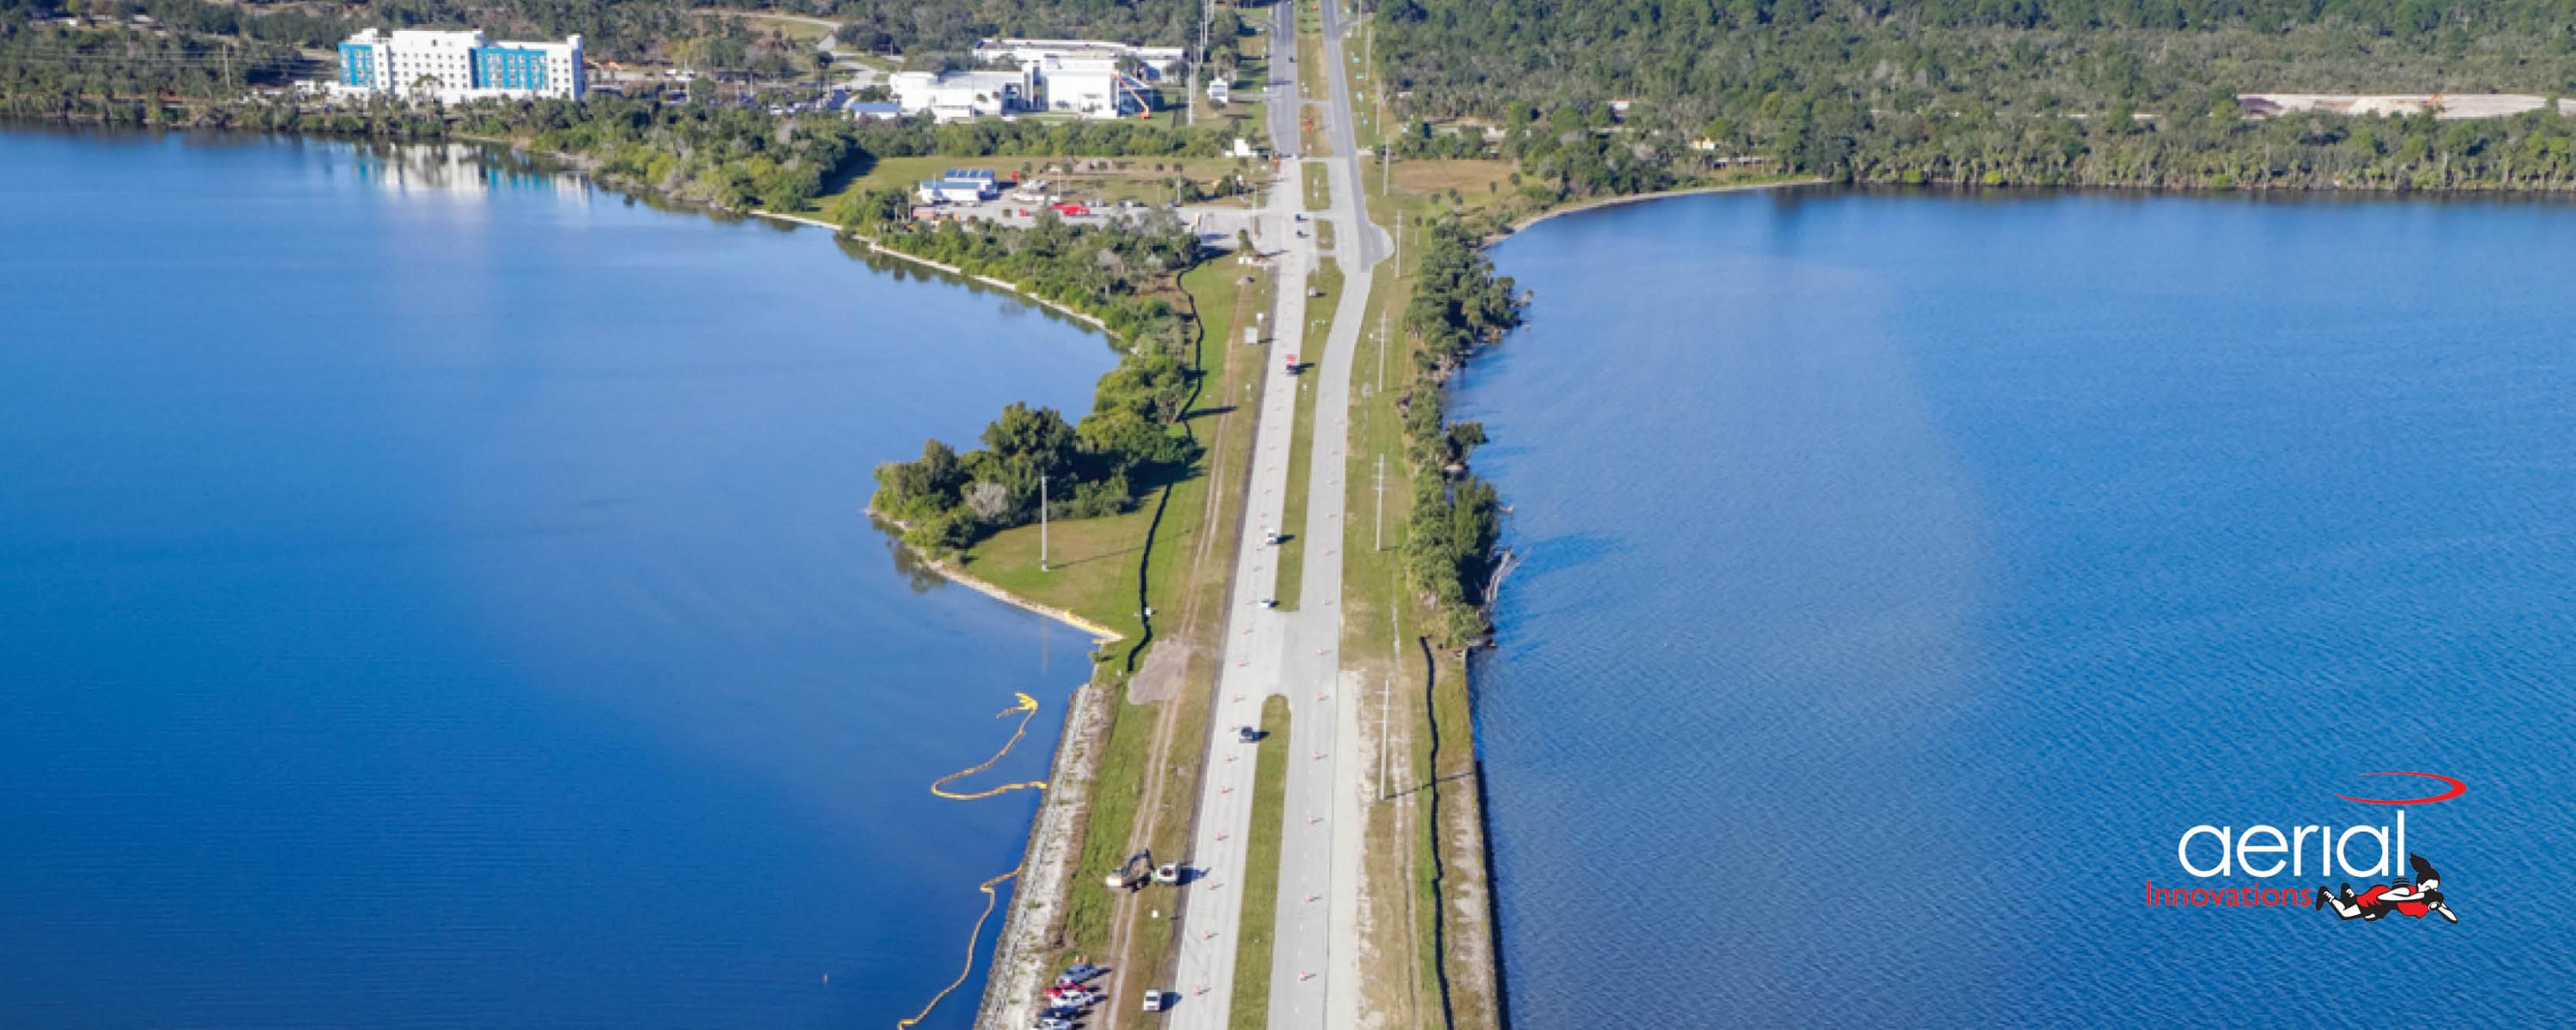 Expertise Project Photo Gallery Indian River Bridge